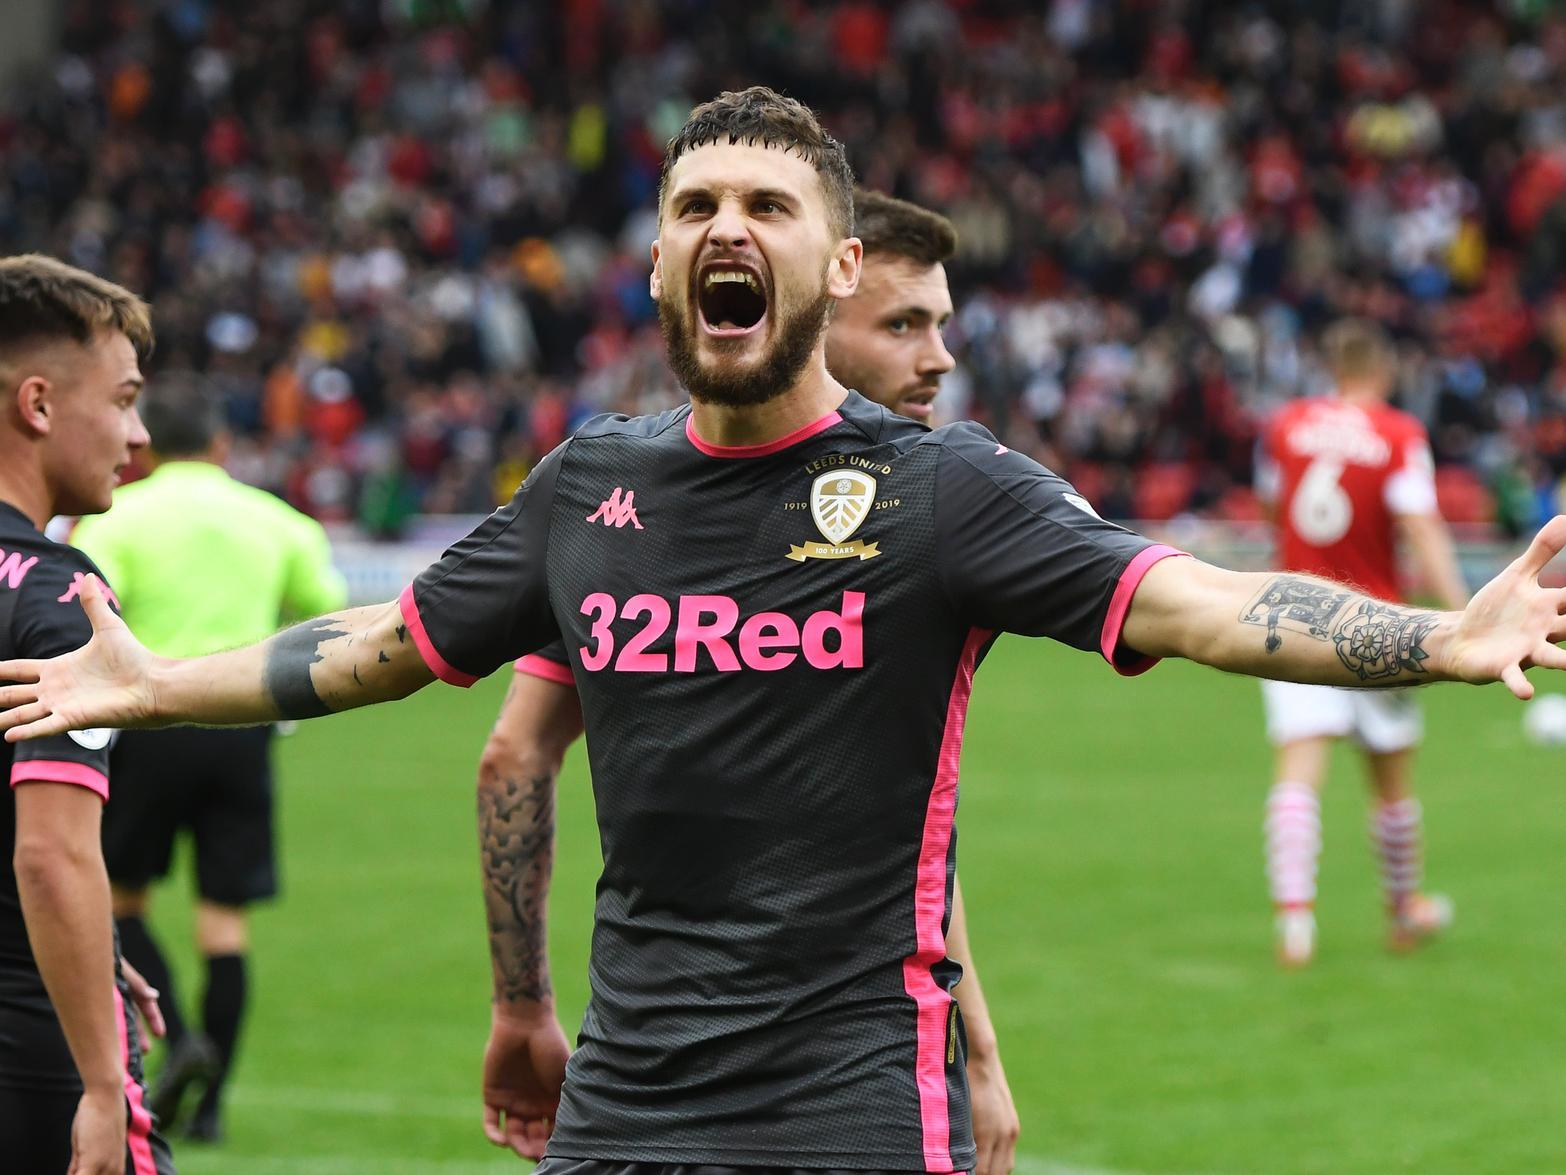 Leeds midfielder Mateusz Klich has claimed that it's only a matter of time until his club earn promotion, but has conceded that the task will be tricky this season given the quality of their rival. (Sport Witness)